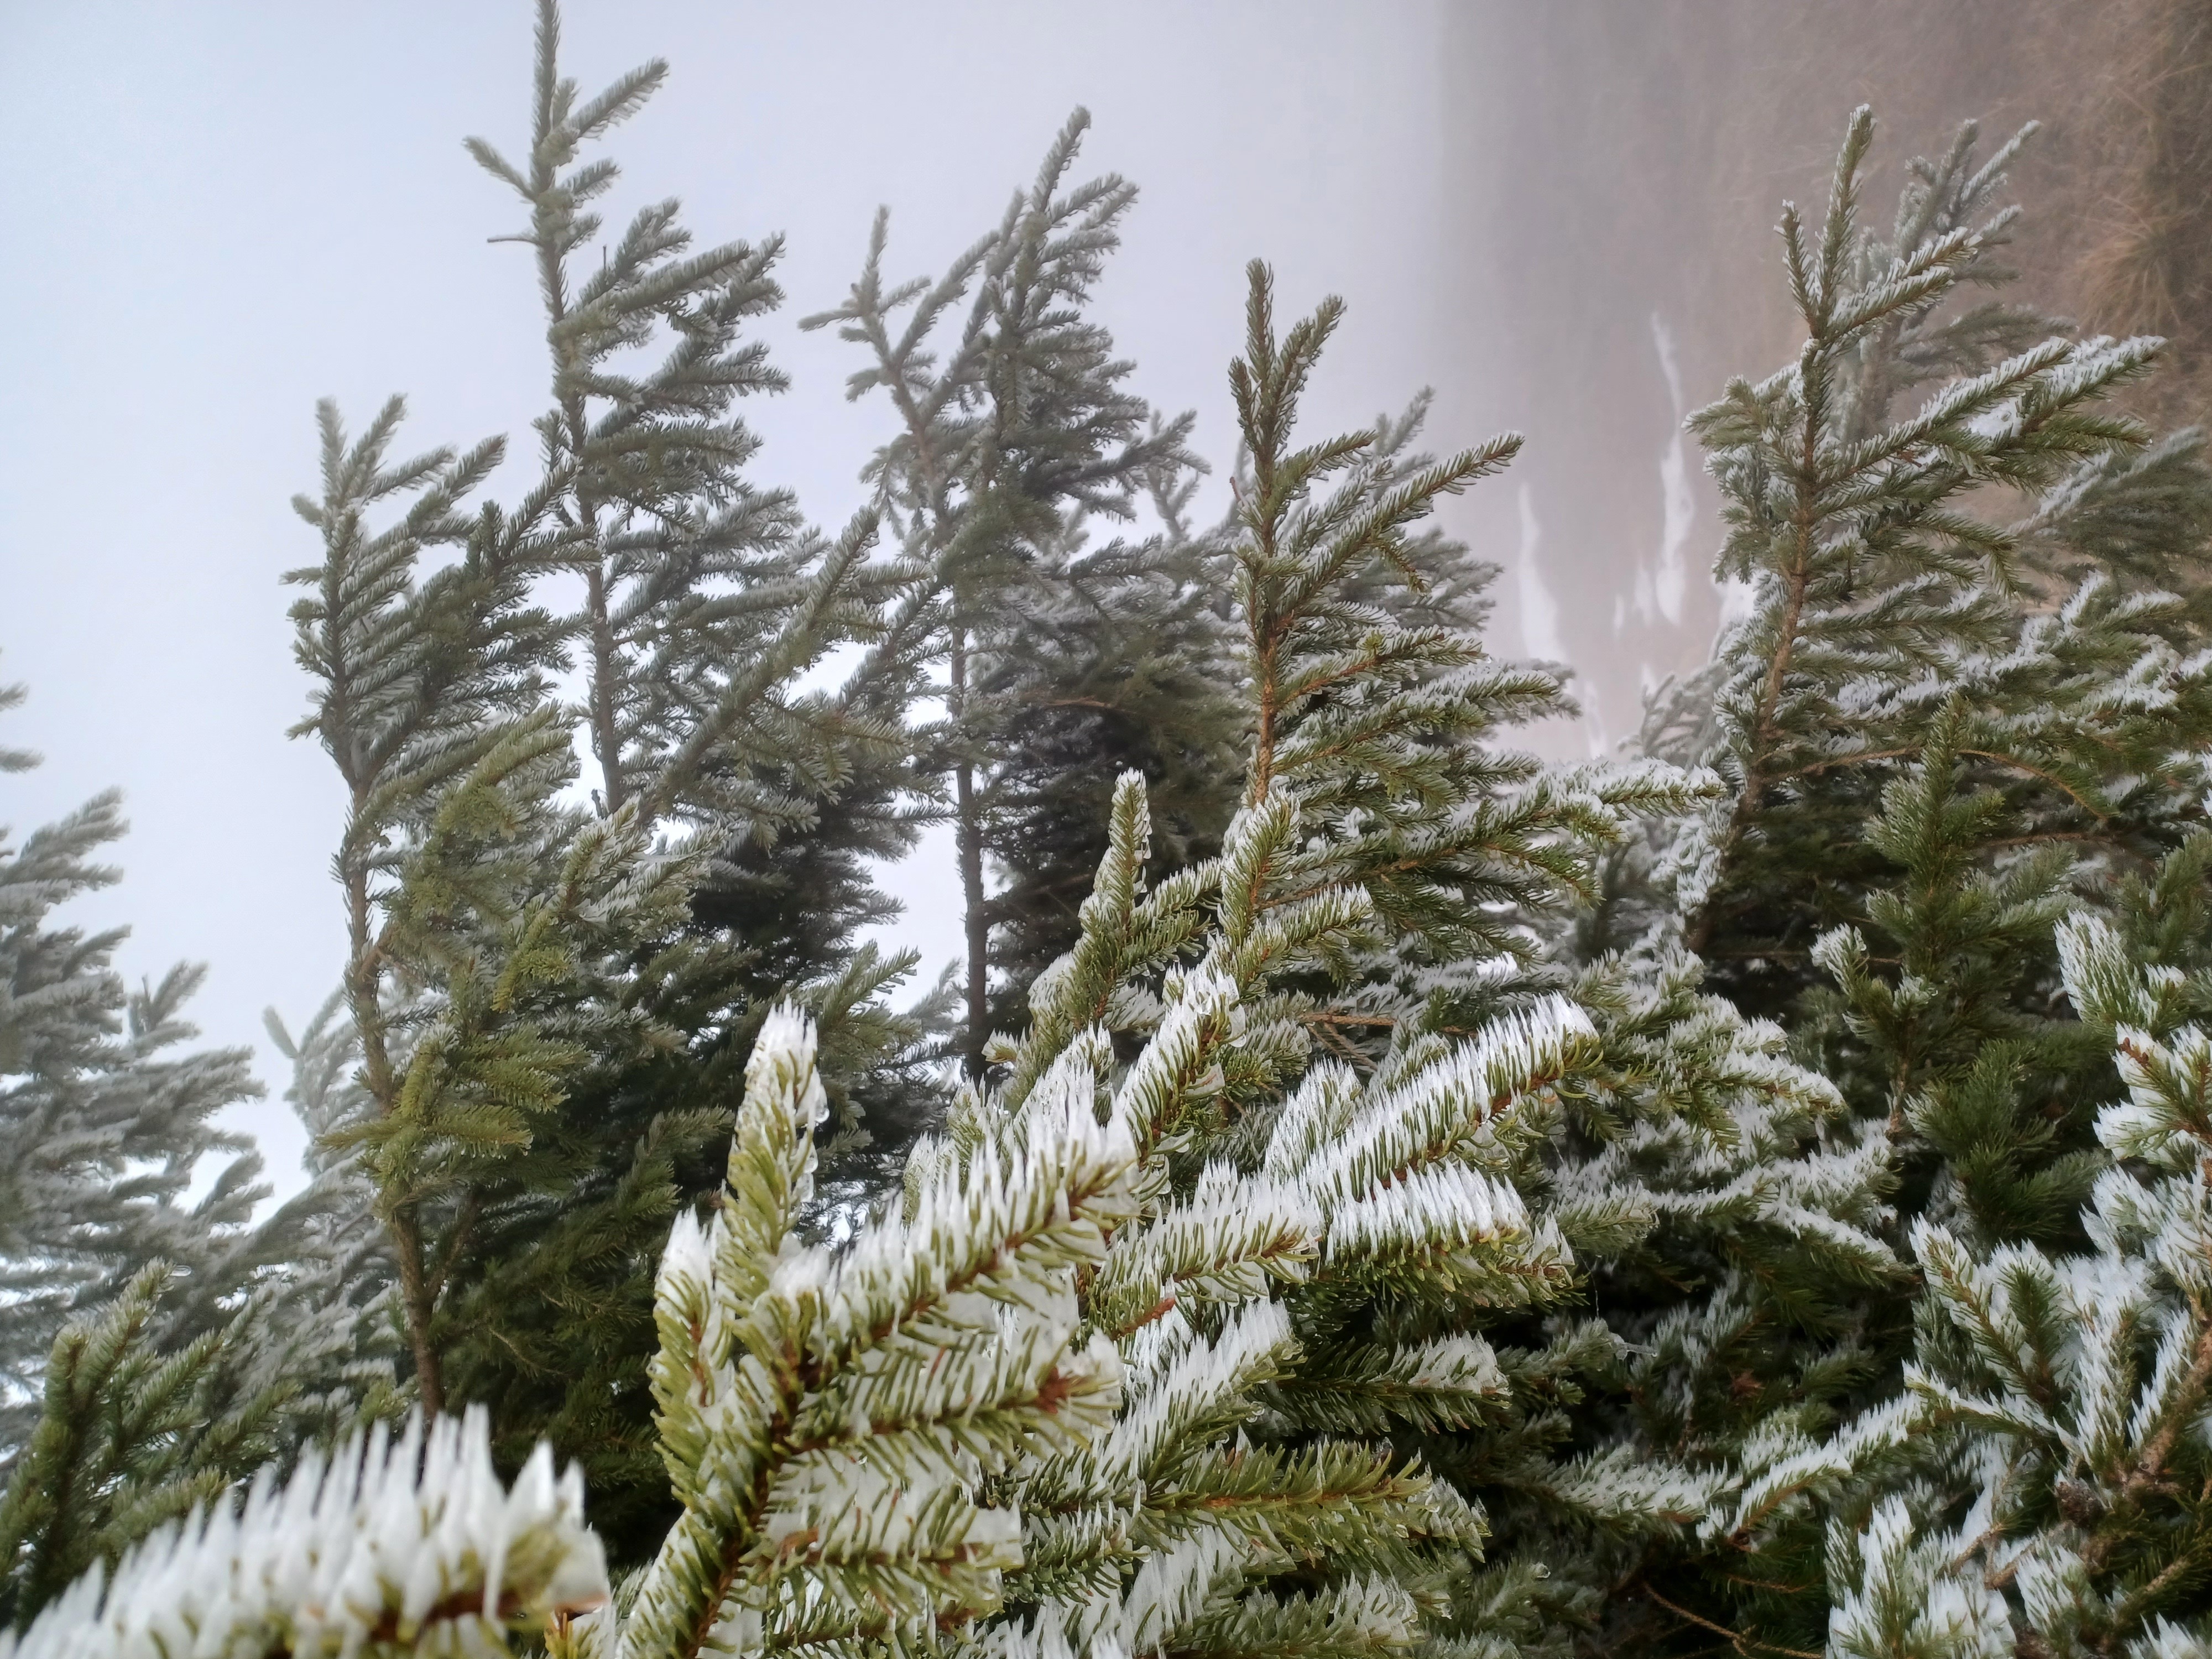 Pine tree up close with ice on the needles